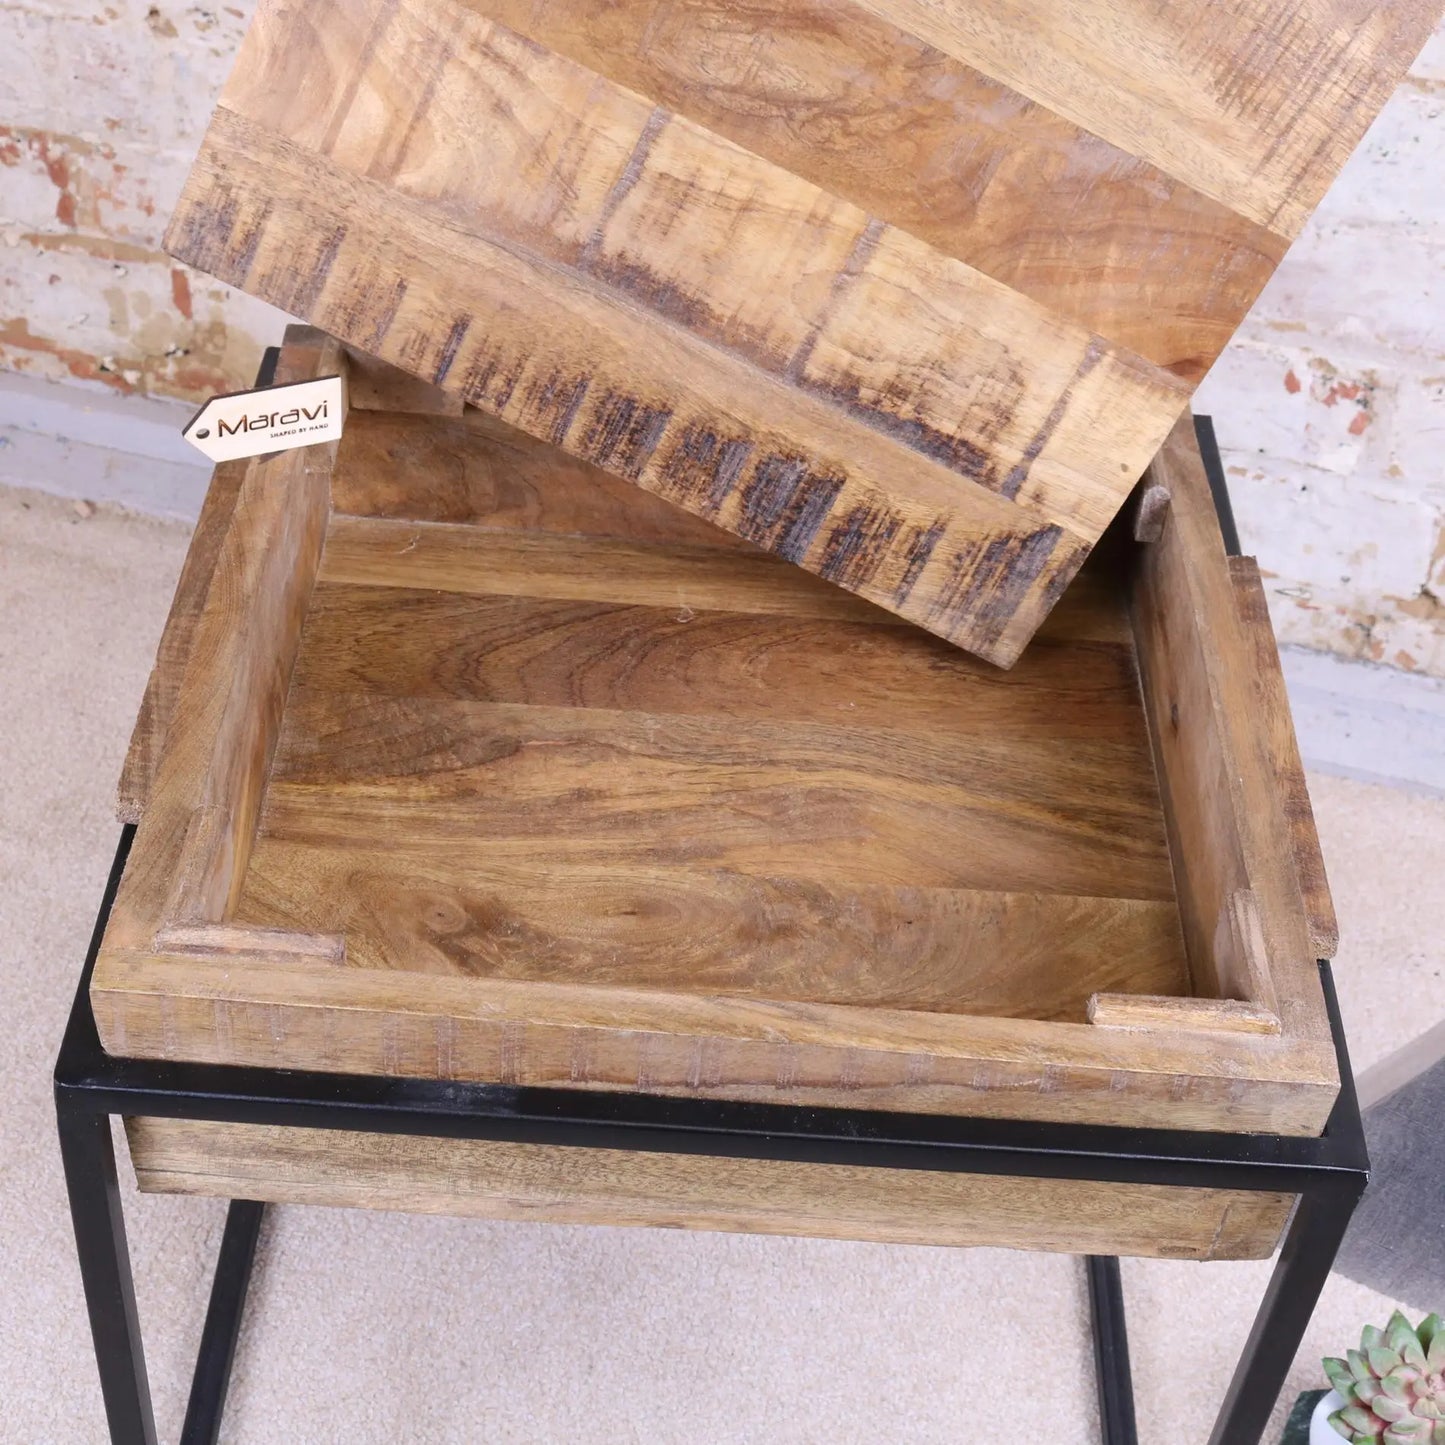 Rewat Chunky Block Side Table with Storage Compartment Zoomed In View of Storage Area